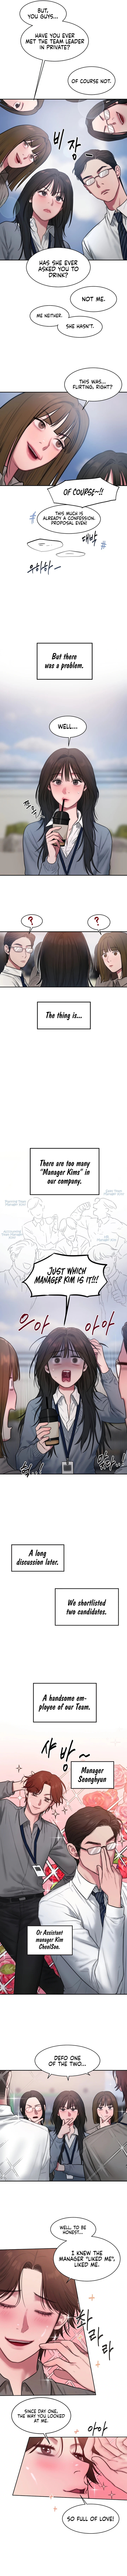 Finding Assistant Manager Kim - Chapter 1 Page 5